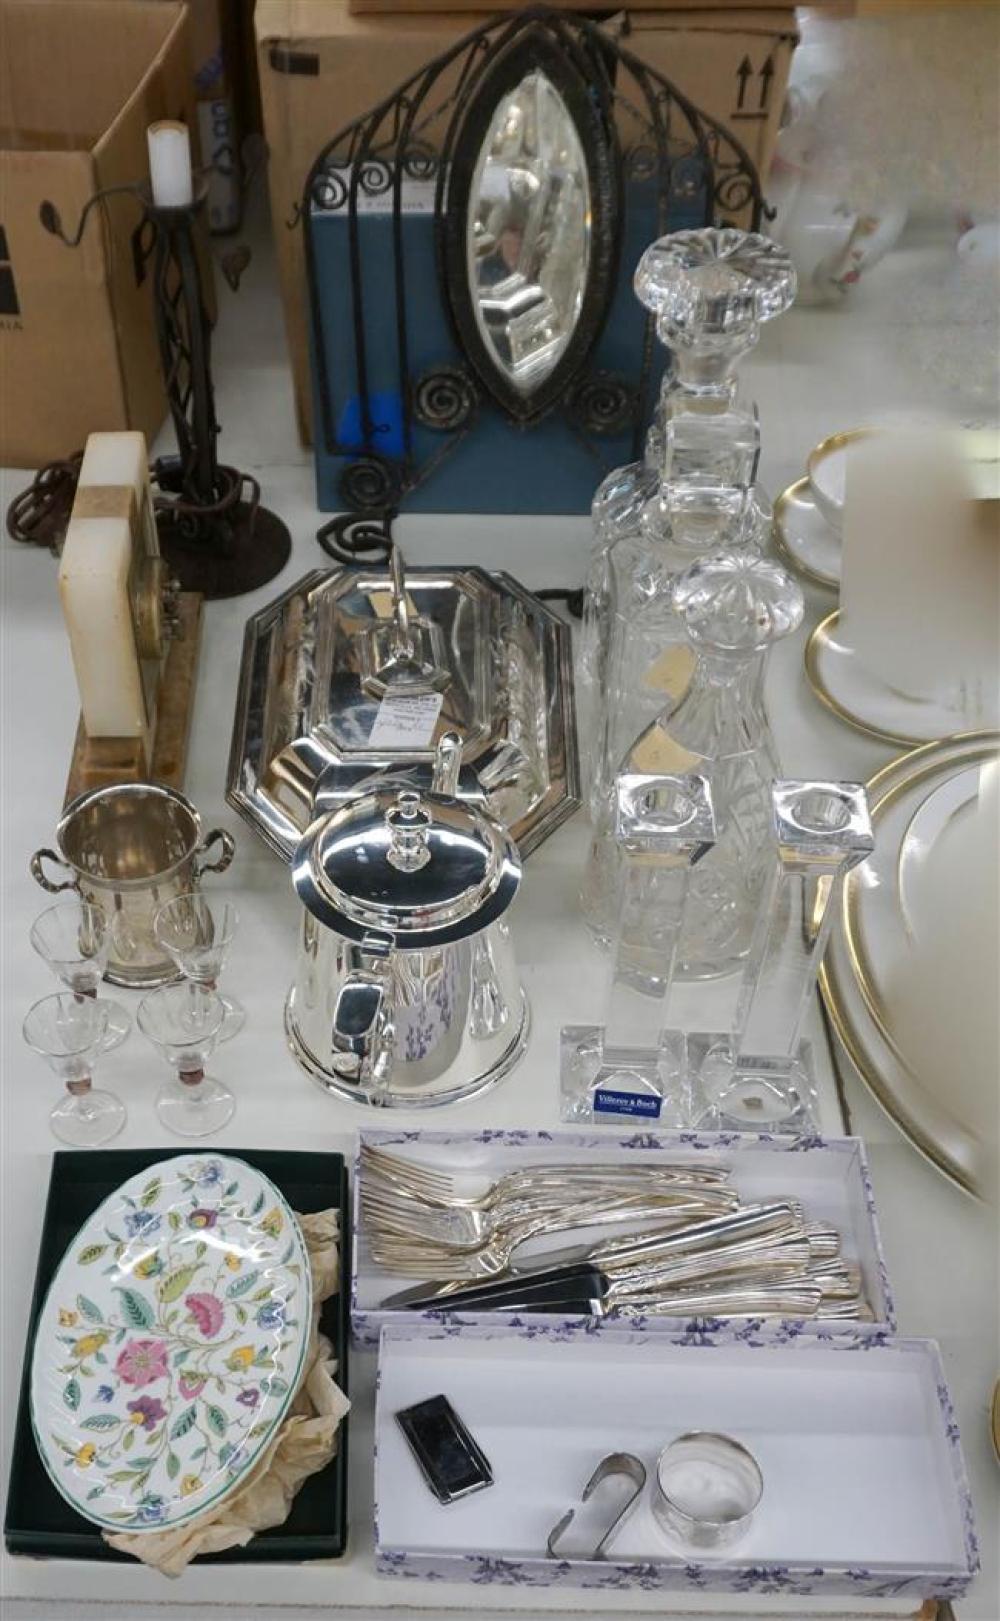 THREE GLASS DECANTERS, PLATED VEGETABLE